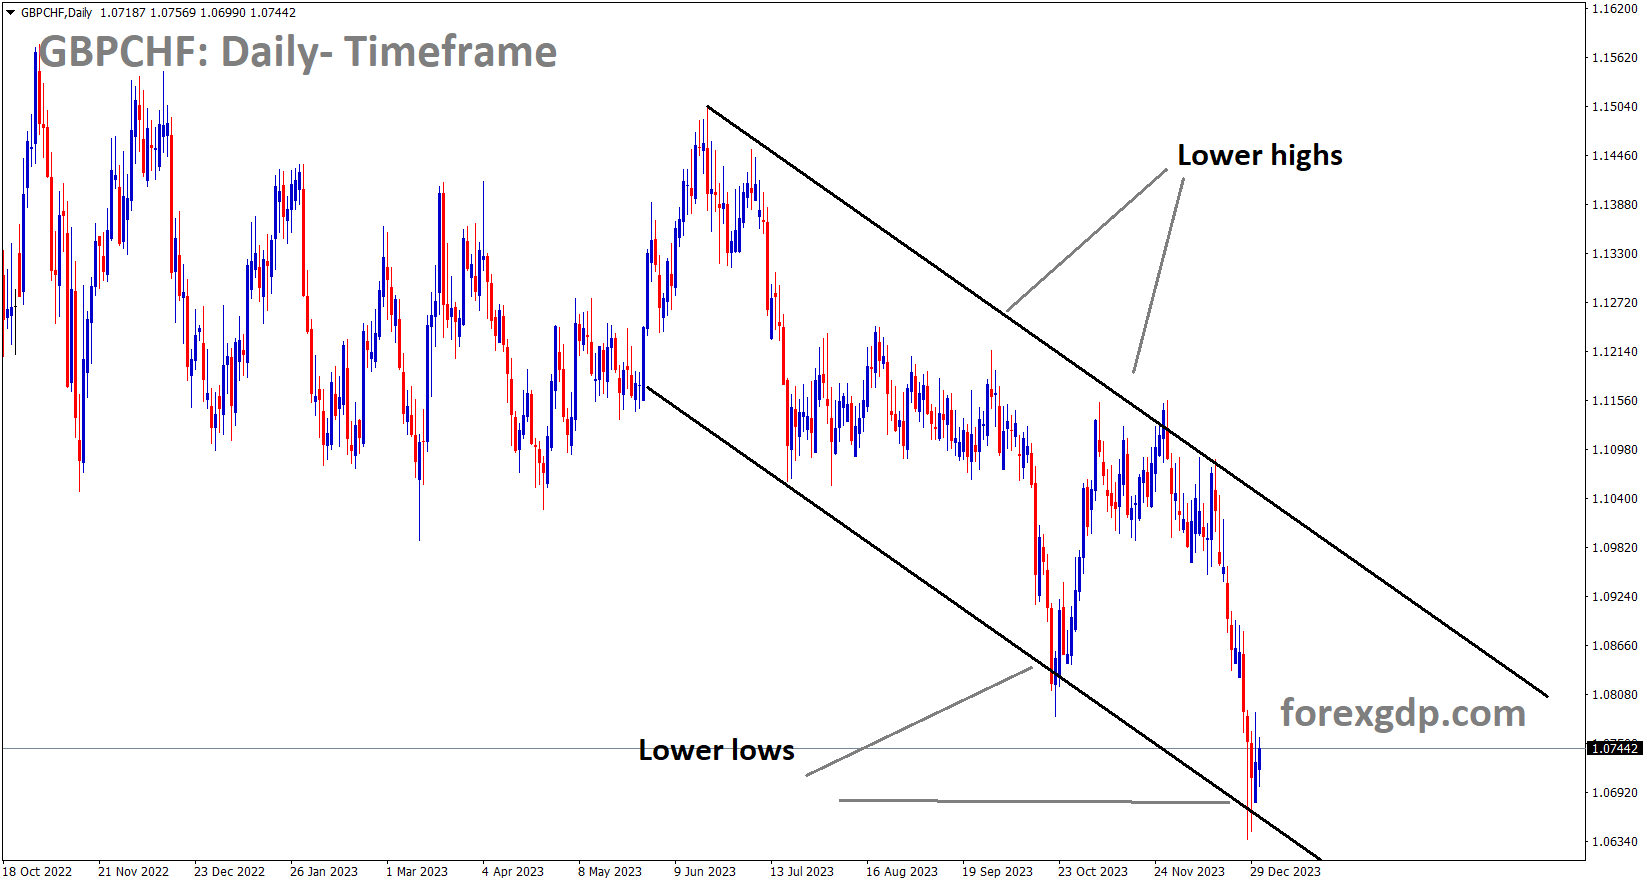 GBPCHF is moving in the Descending channel and the market has rebounded from the lower low area of the channel